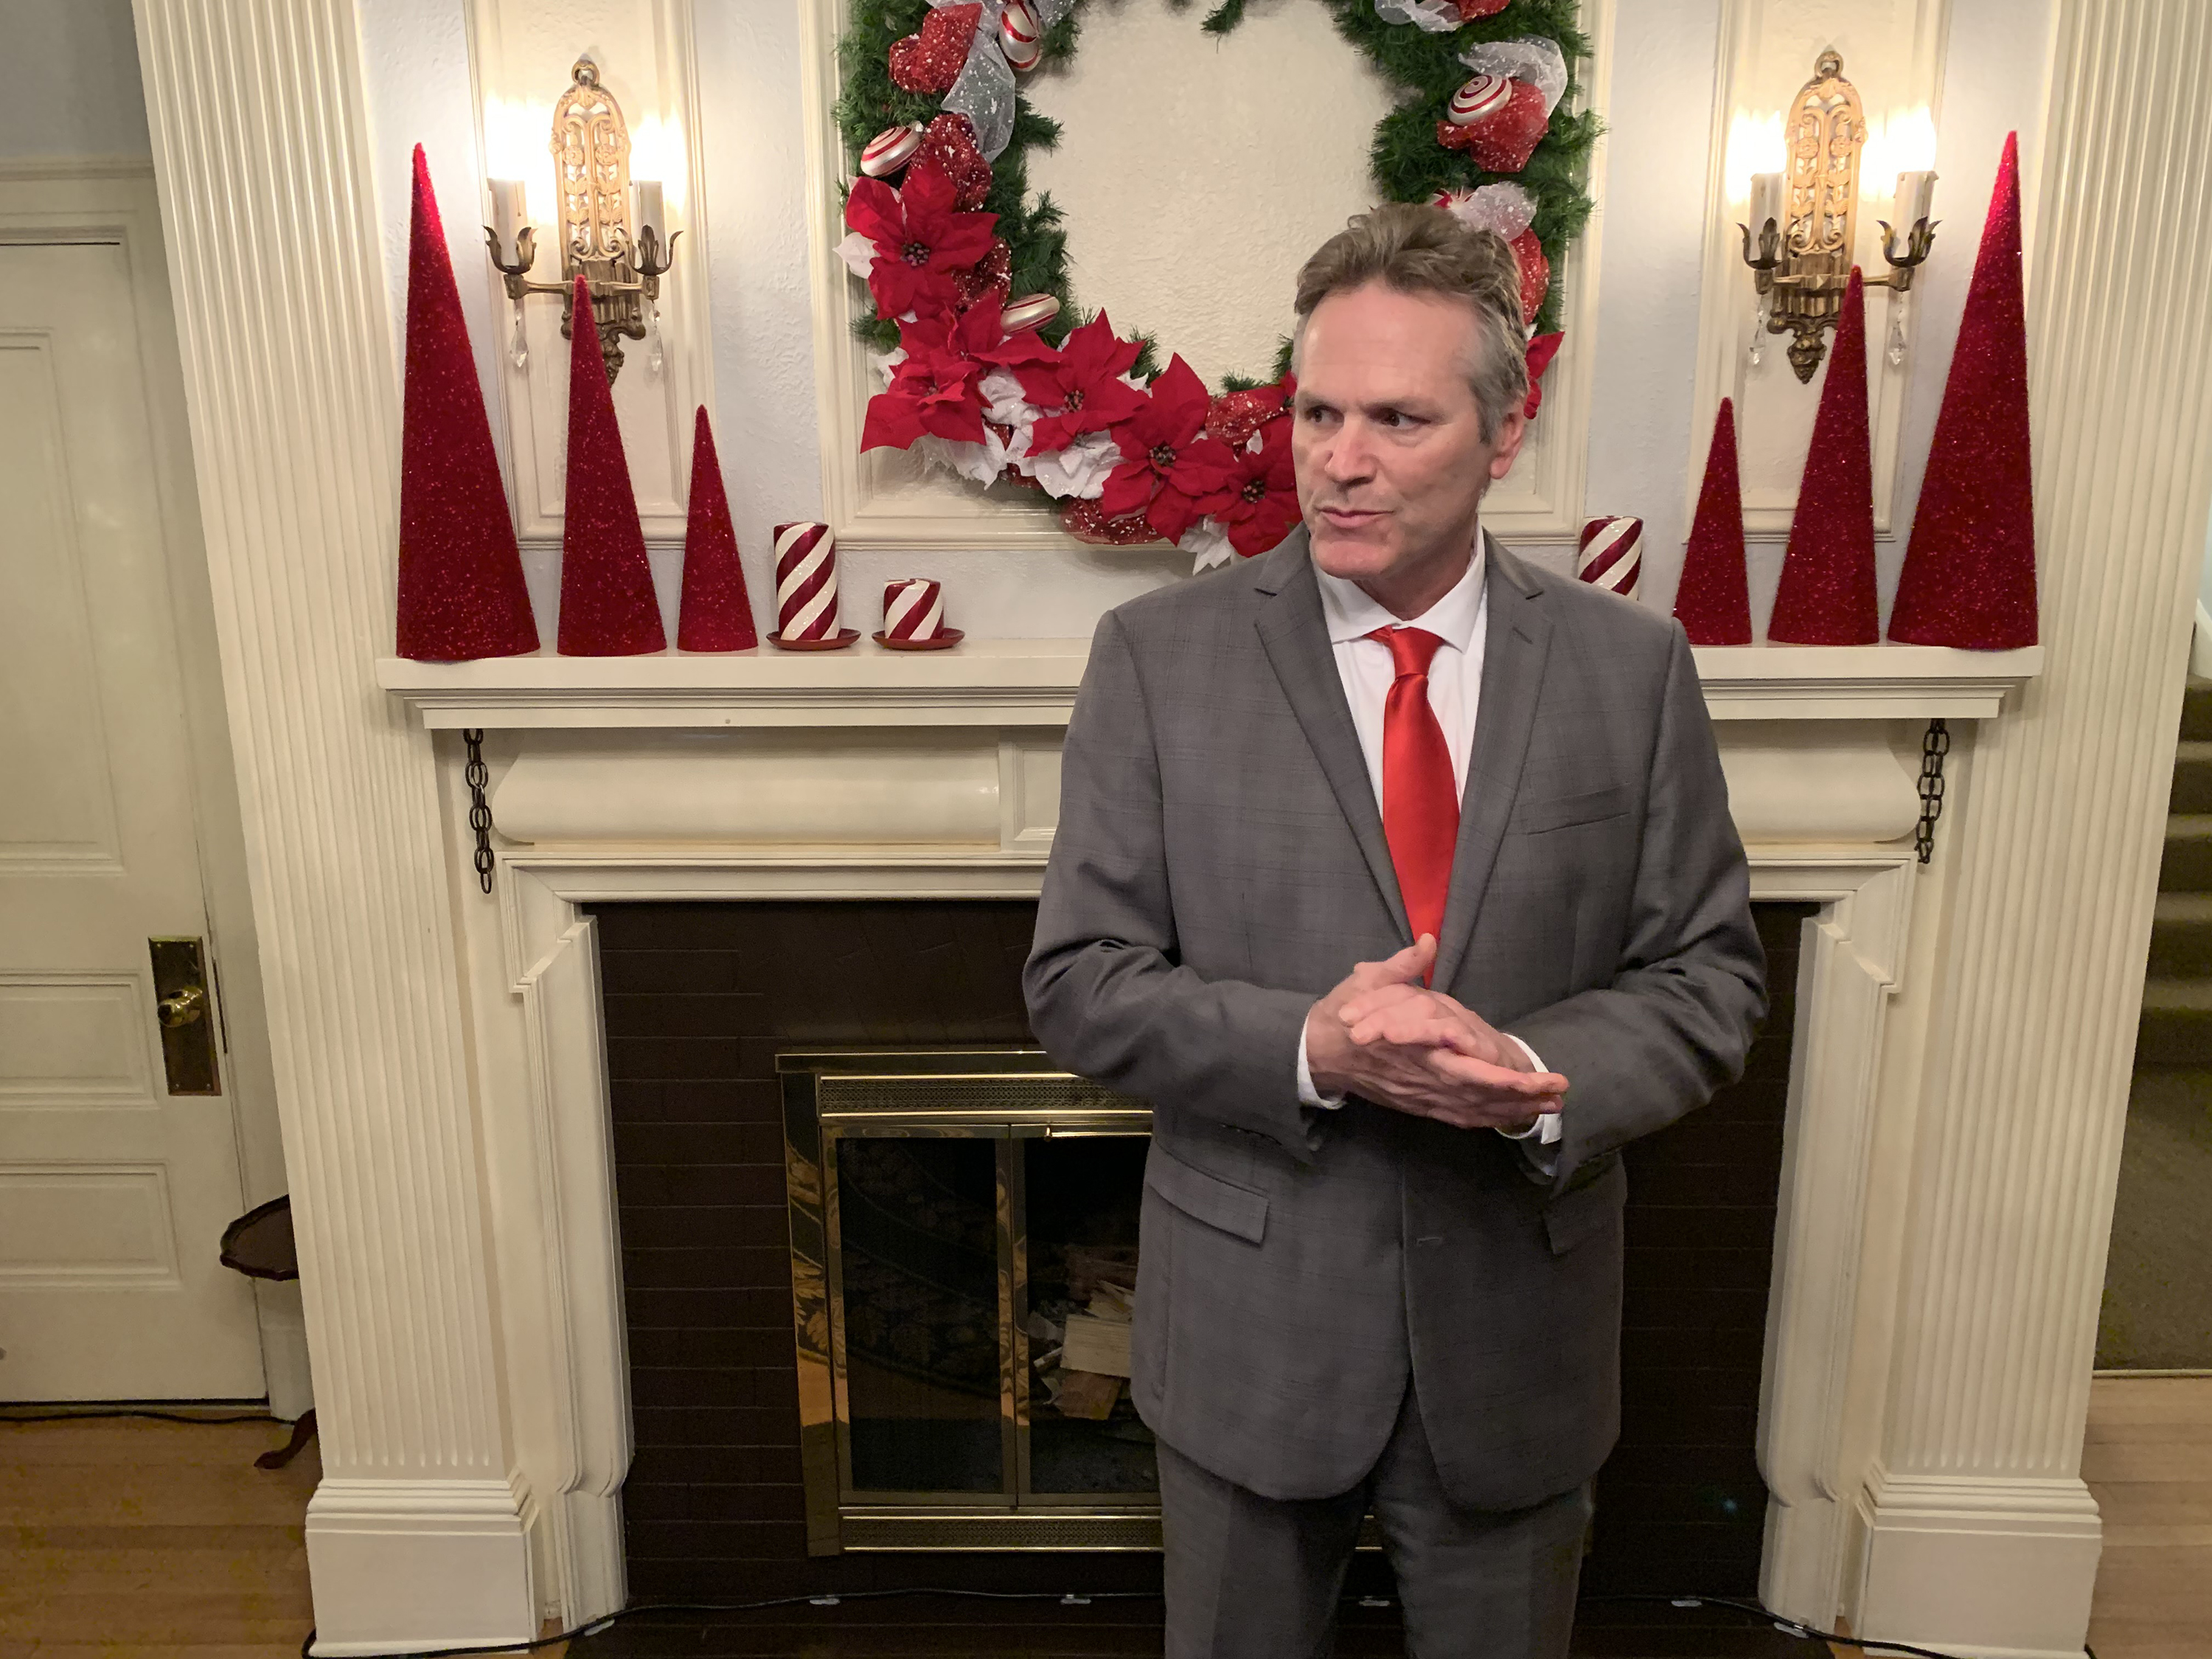 Gov. Mike Dunleavy waits for guests at the annual Christmas open house on Tuesday, Dec. 10, 2019 in Juneau, Alaska.